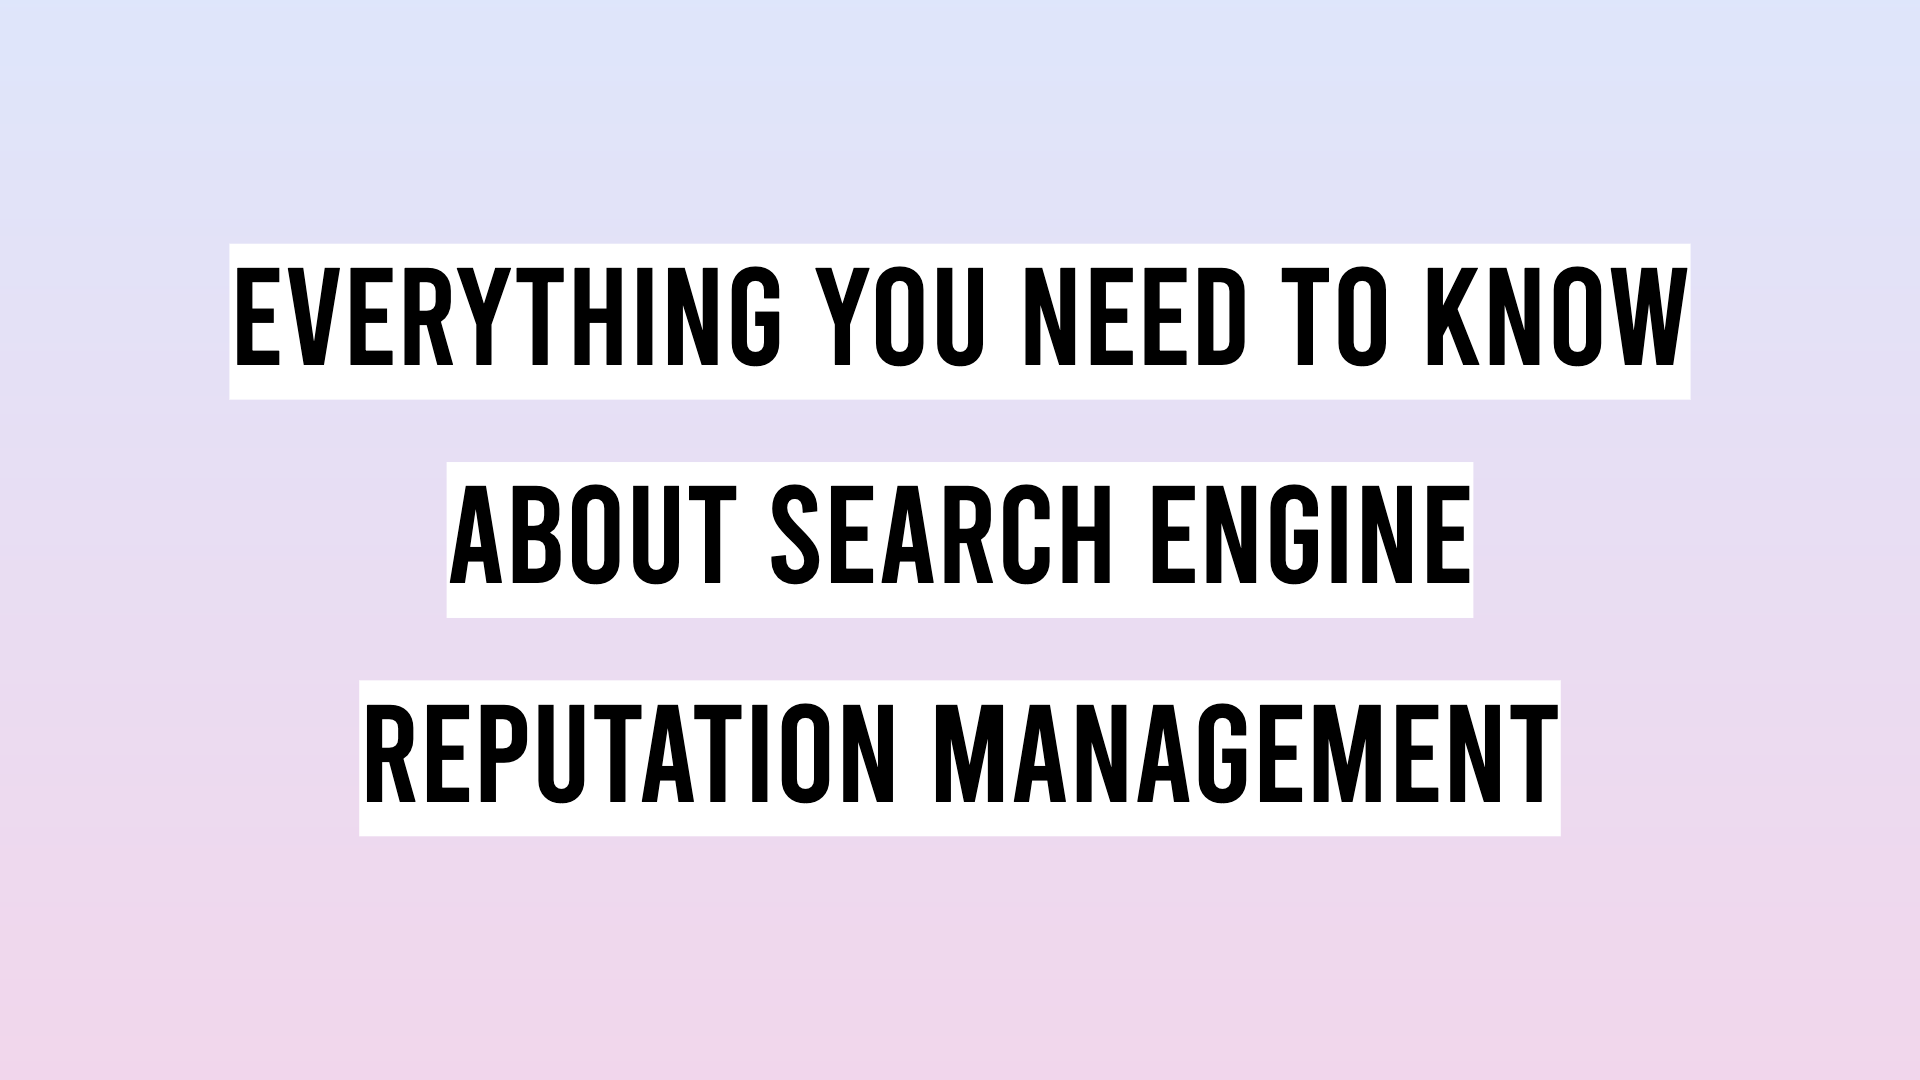 Everything You Need to Know About Search Engine Reputation Management